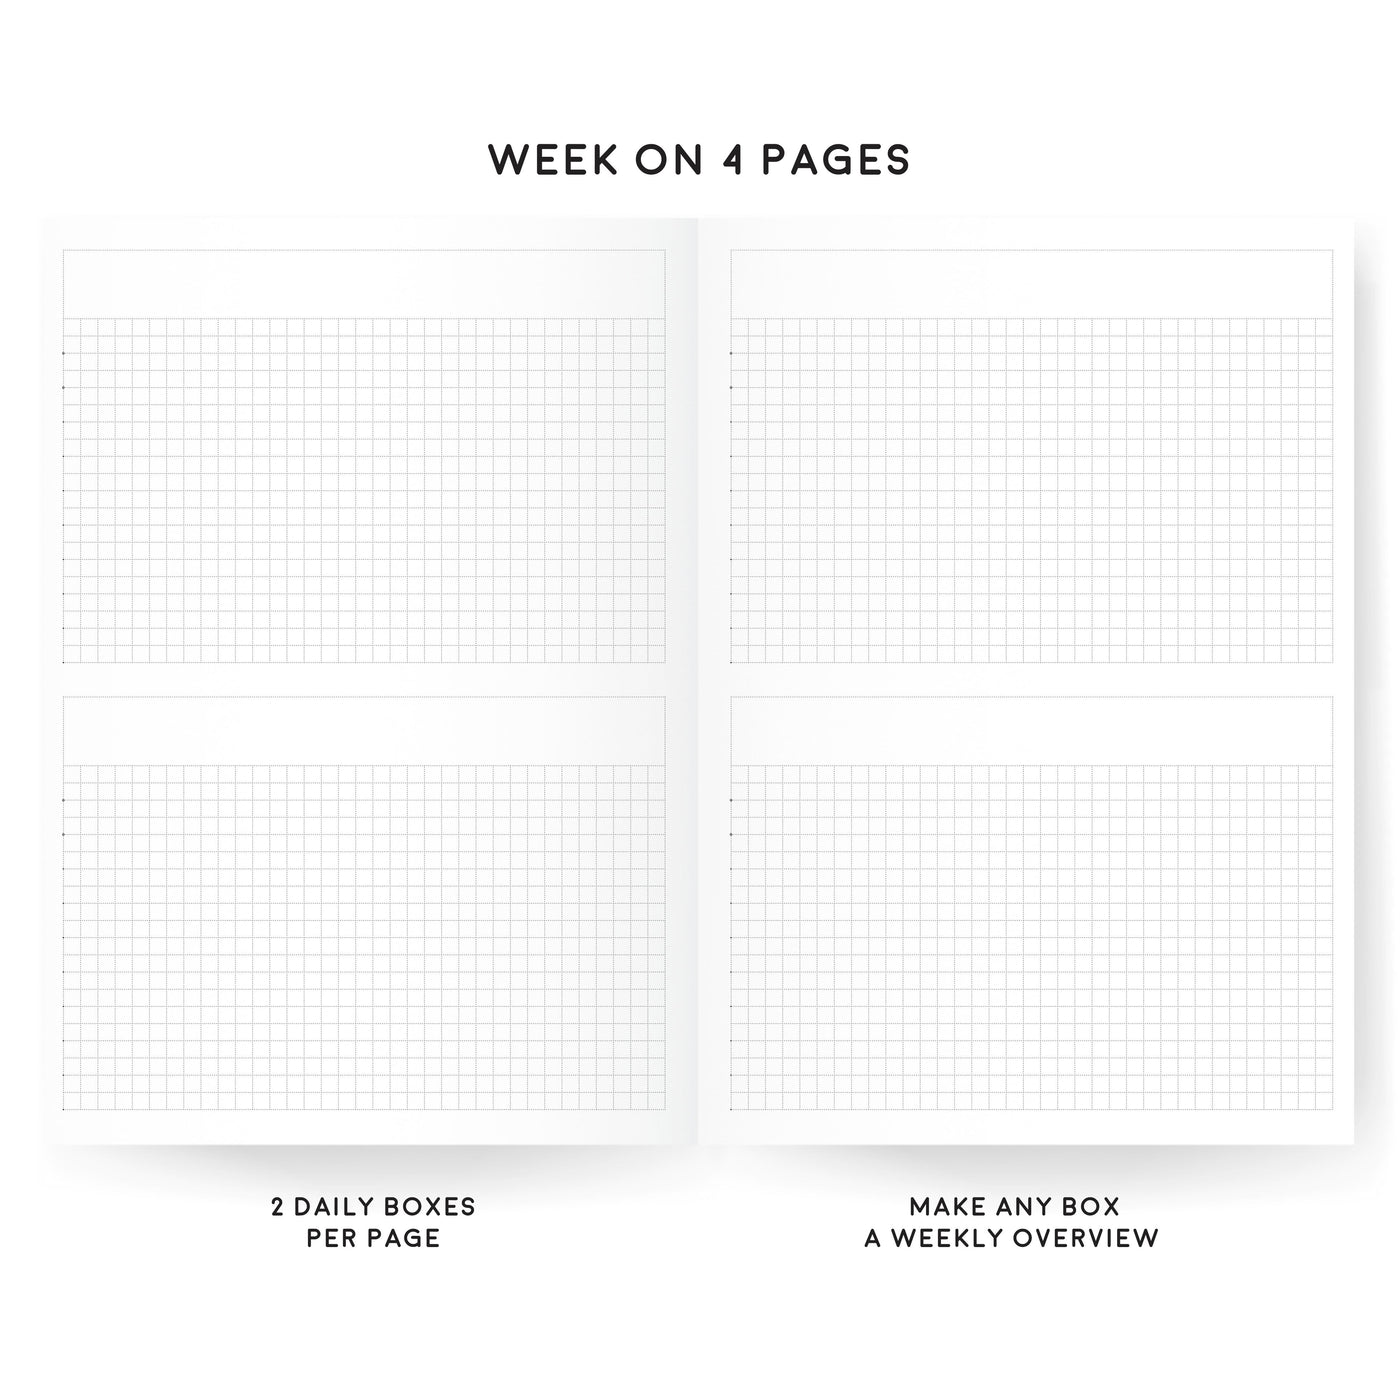 OOPS A5 CLASSIC WEEKLY [HORIZONTAL] PLANNER TOMOE RIVER PAPER